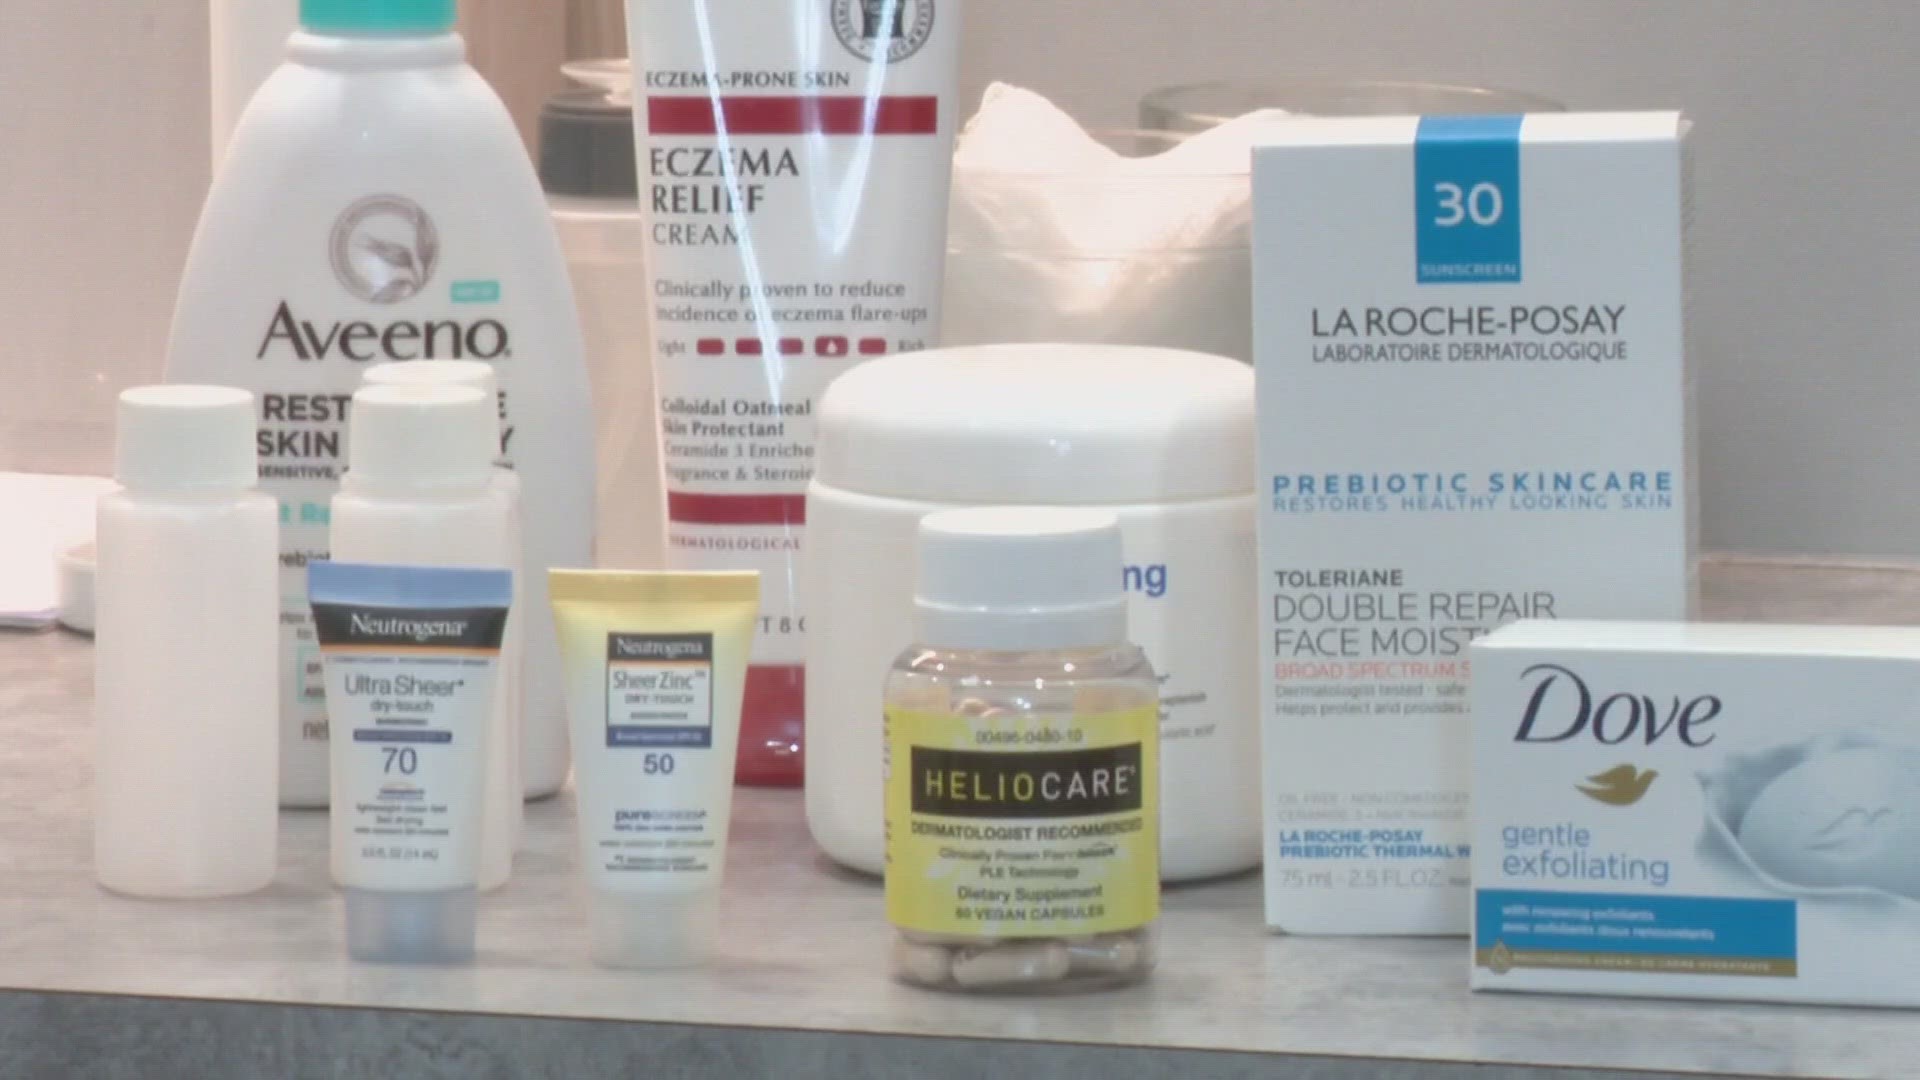 Tracy Townsend spoke with medical experts on how to keep our skin healthy and hydrated while soaking in the sun.